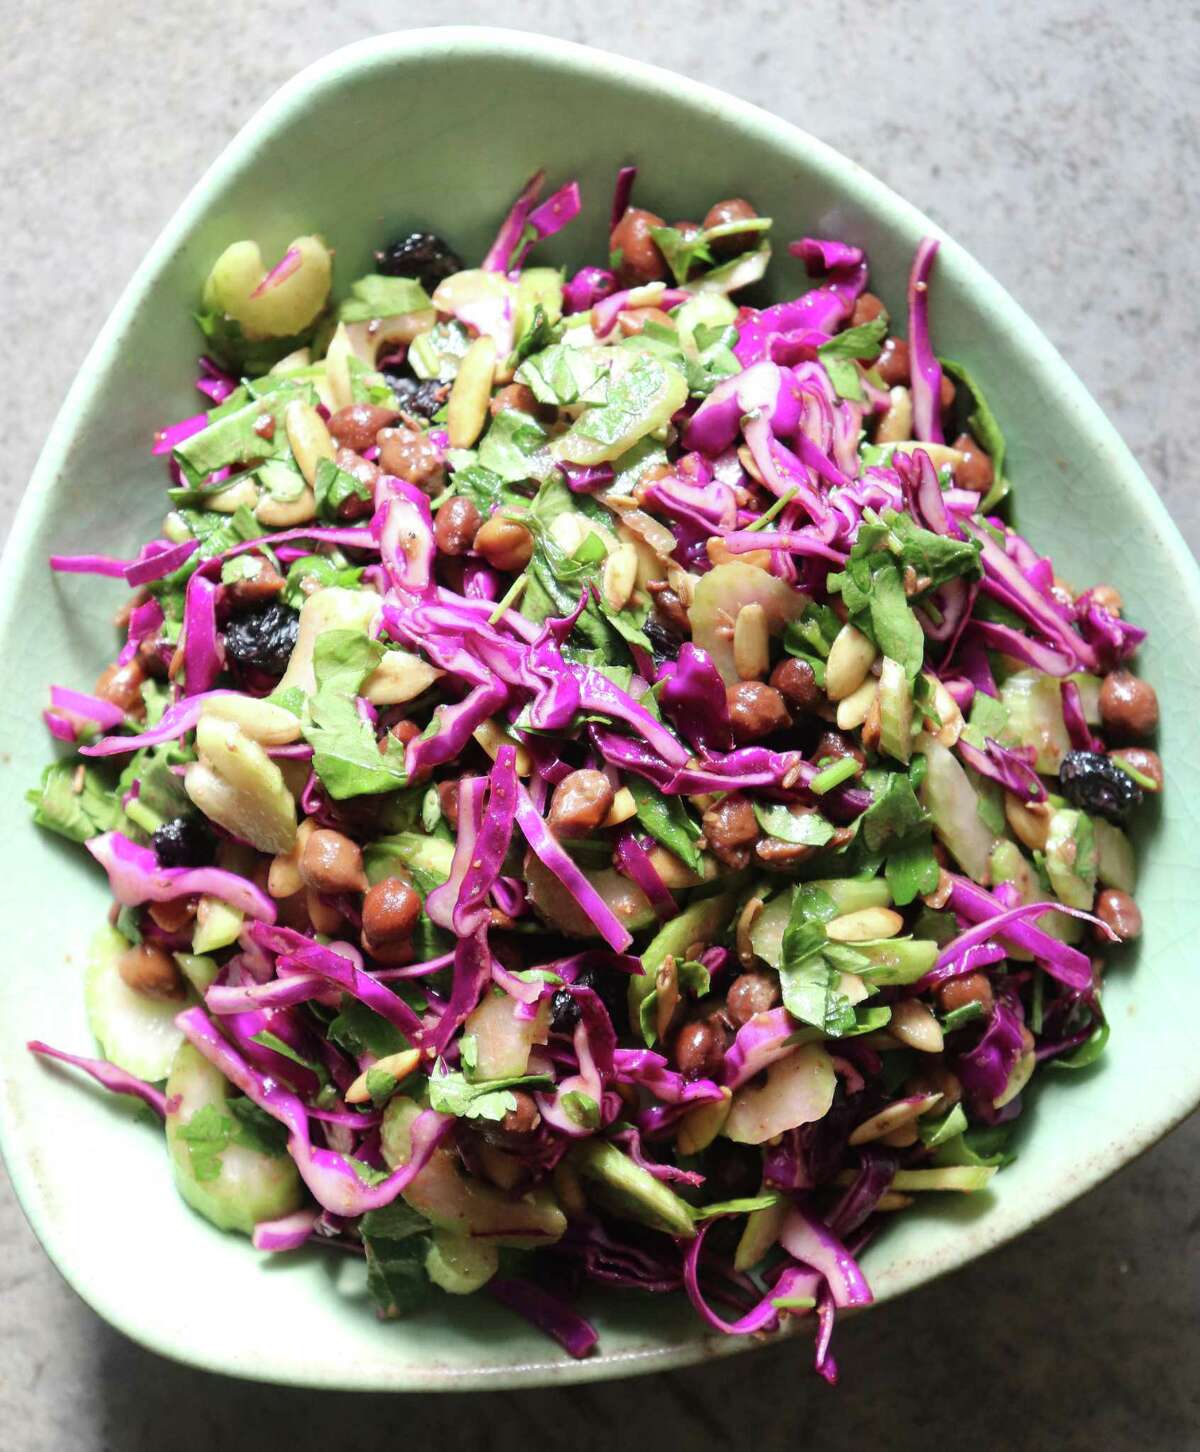 Use your favorite beans (pinto, black, garbanzo or black-eyed peas) to create a filling bean salad.